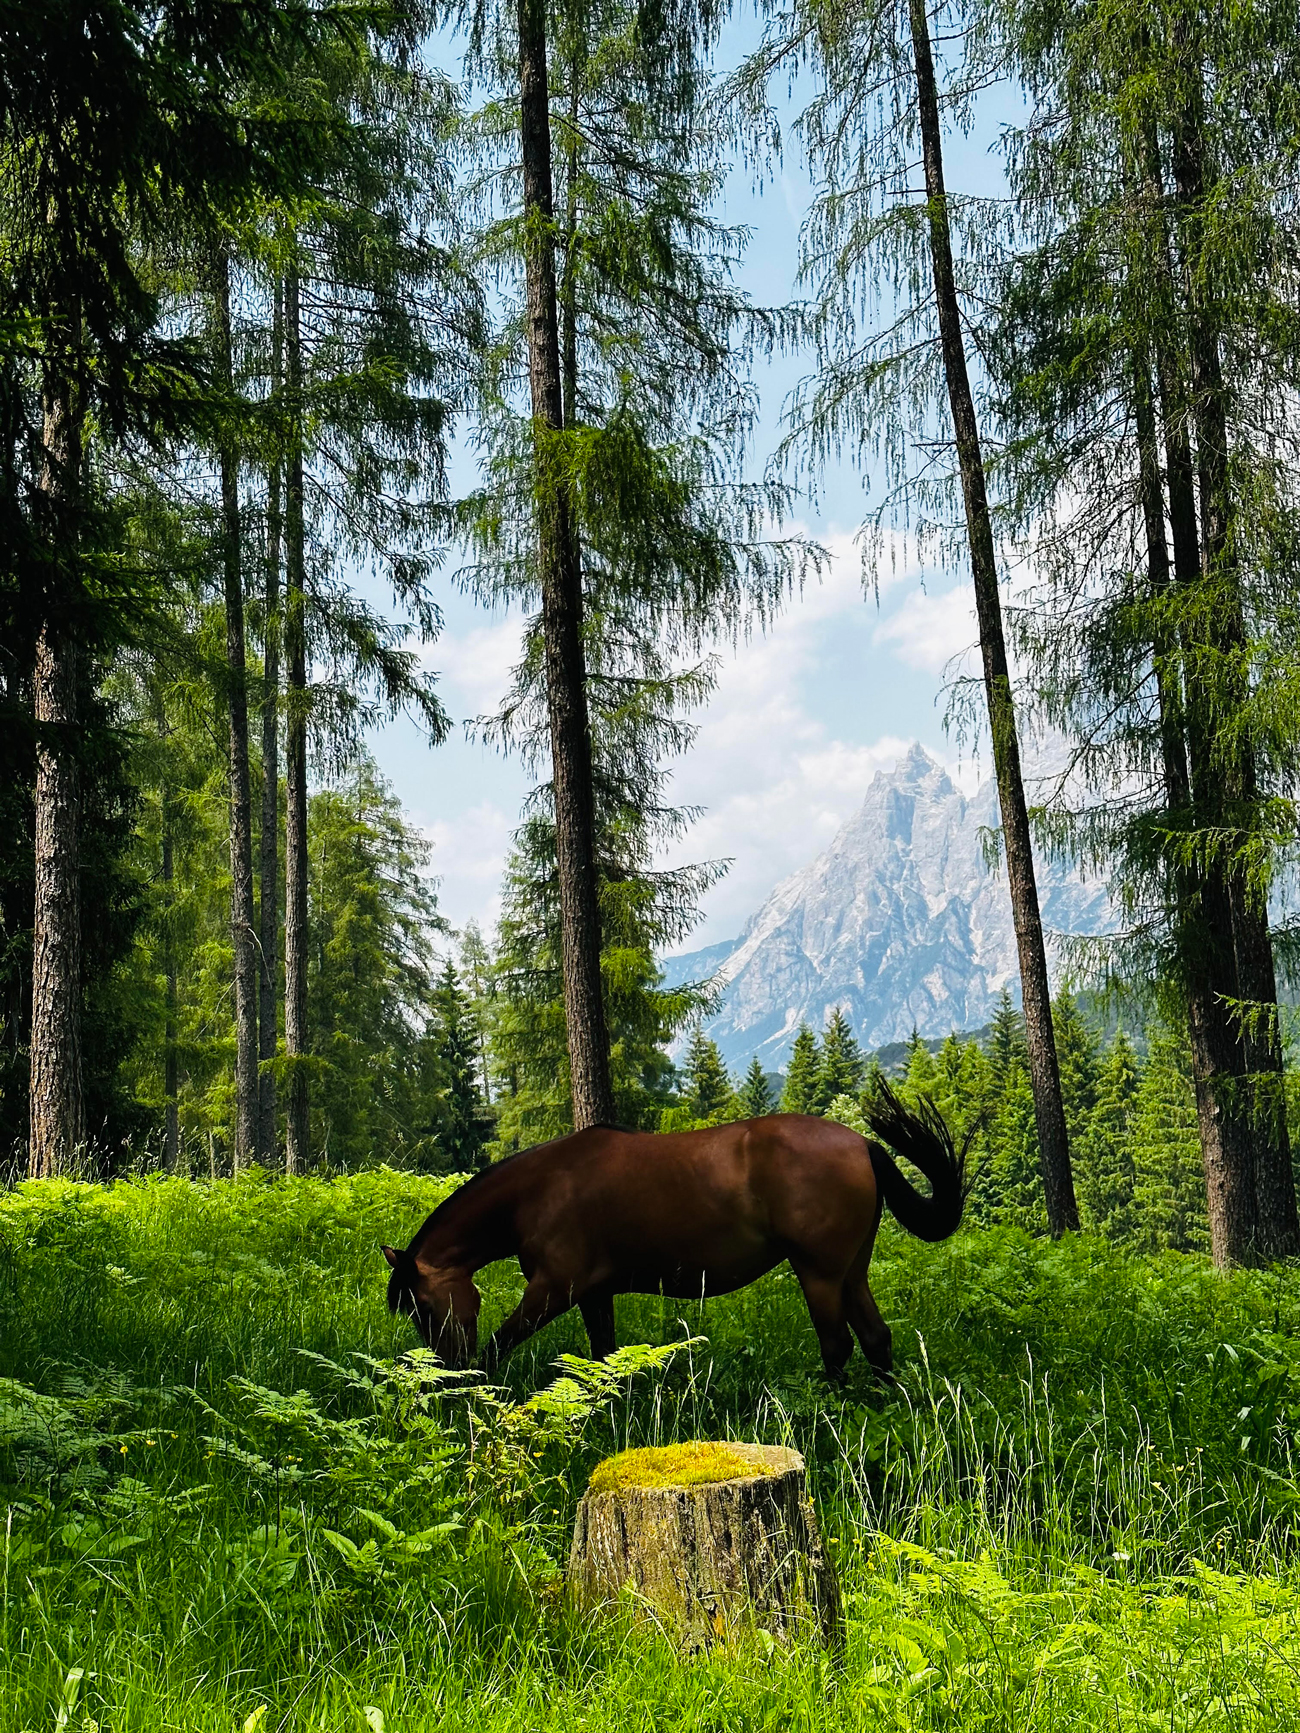 A brown horse grazes in a sunlit forest clearing surrounded by tall trees. A mountain peak is visible in the background under a clear sky.